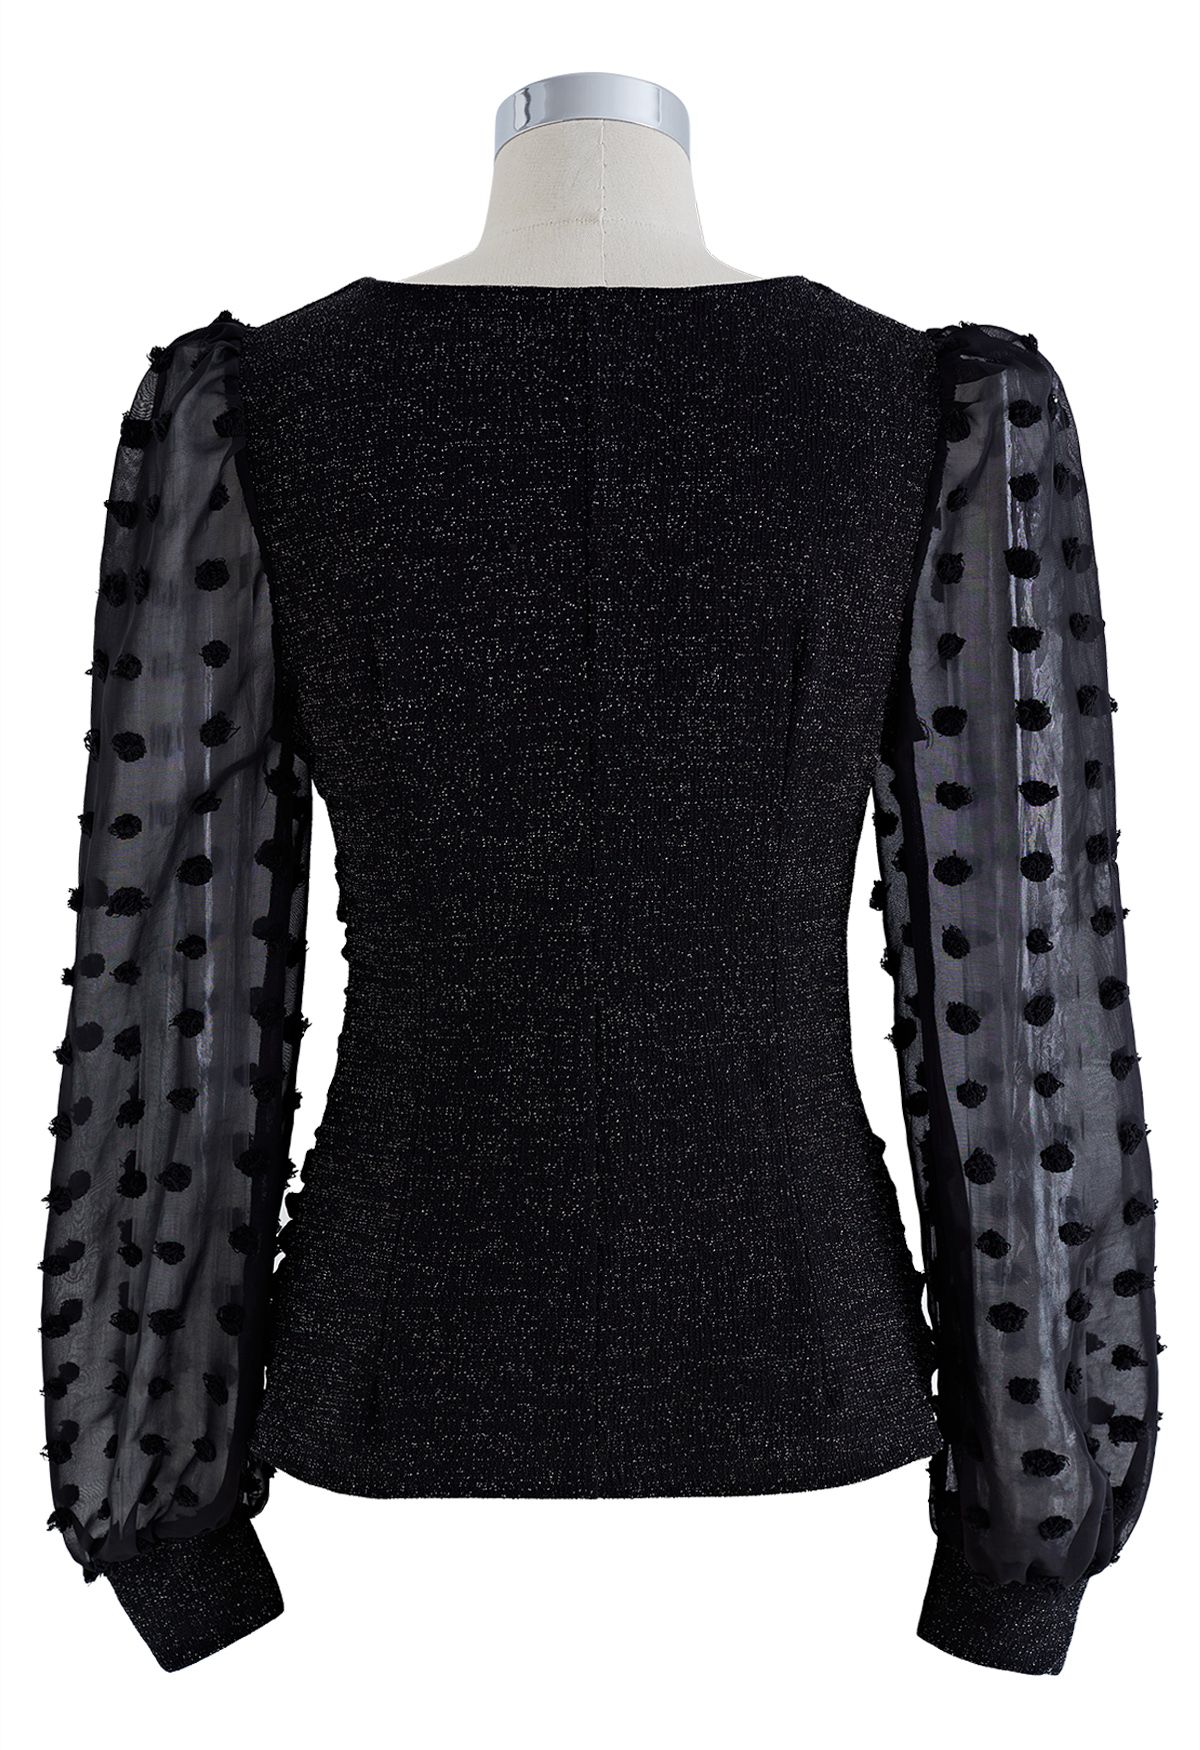 Sweetheart Neck Ruched Spliced Shimmer Top in Black